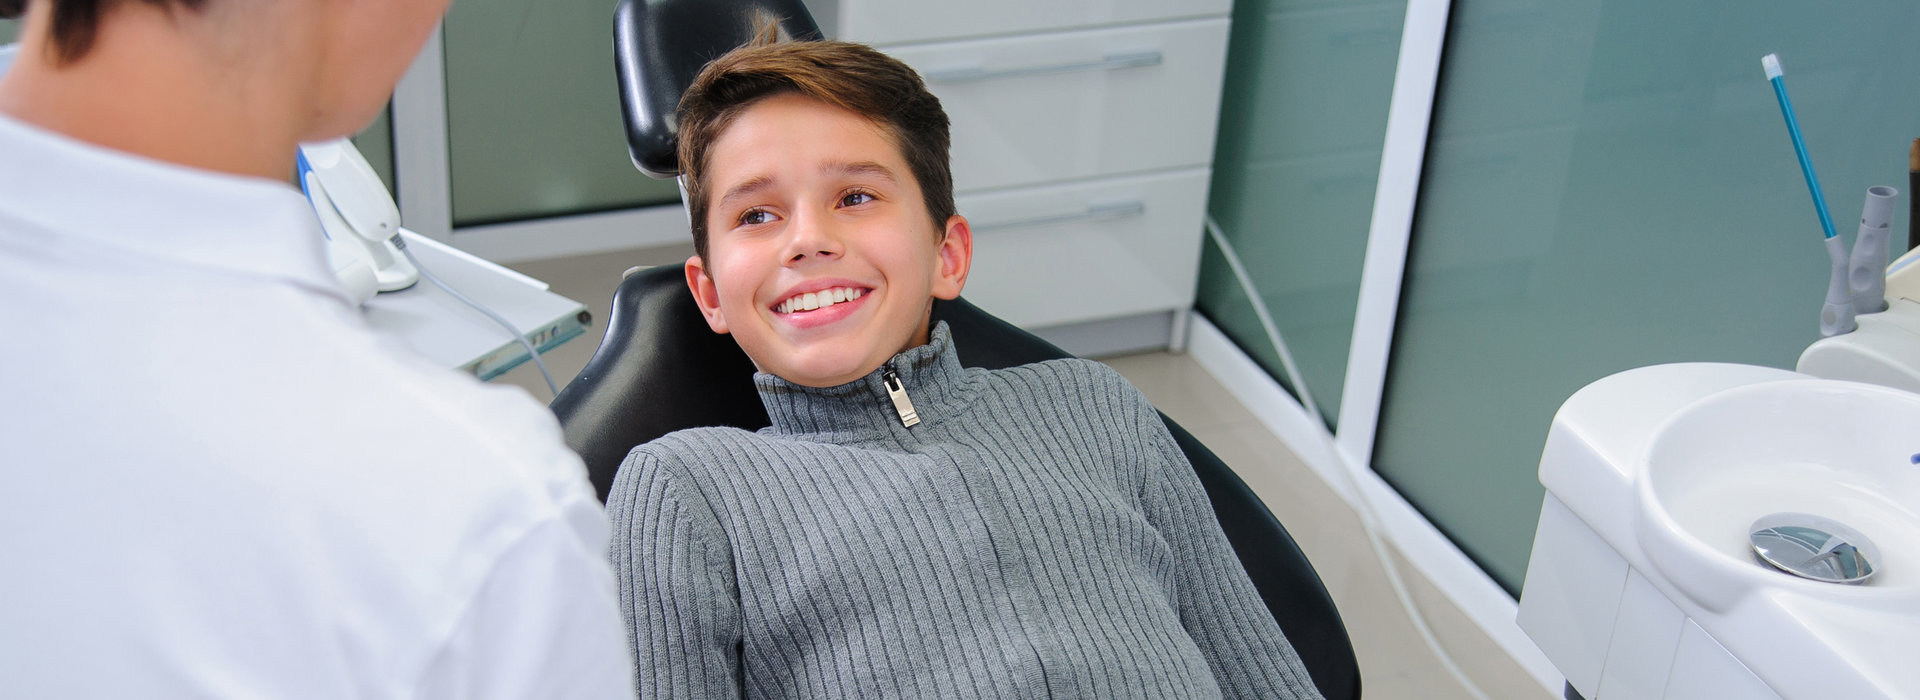 A child is smiling after Tooth Extraction.